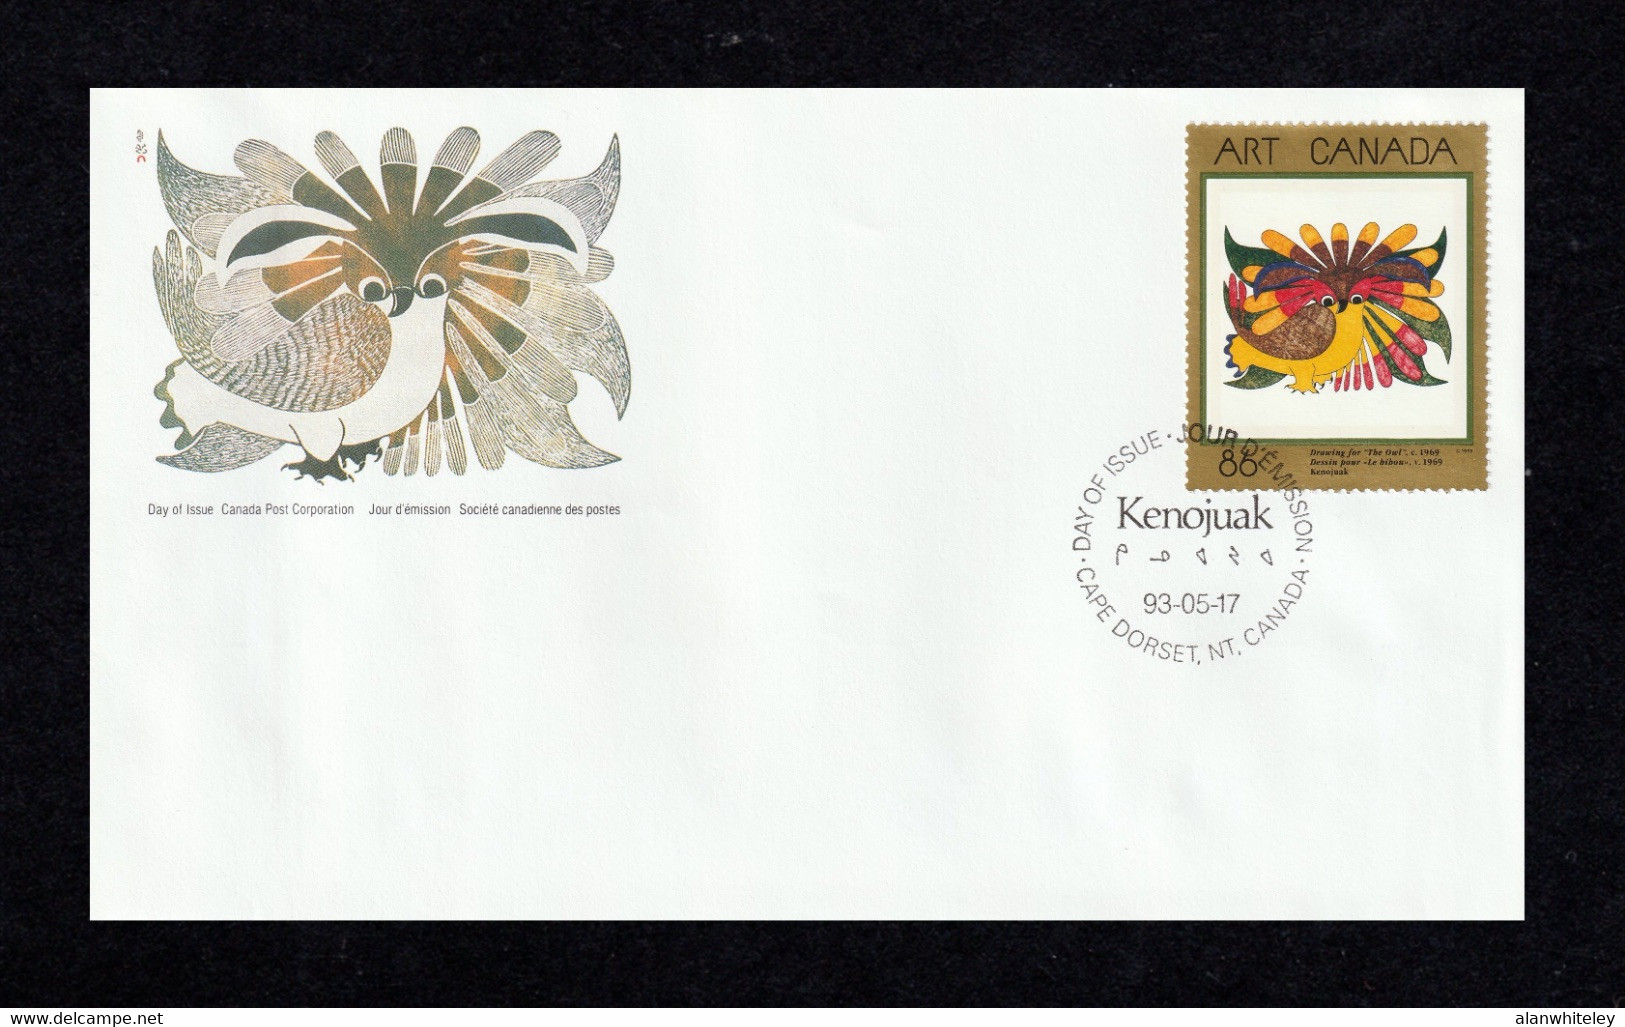 CANADA 1993 Canadian Art (6th Series) / Kenojuak Ashevak / Owl: First Day Cover CANCELLED - 1991-2000